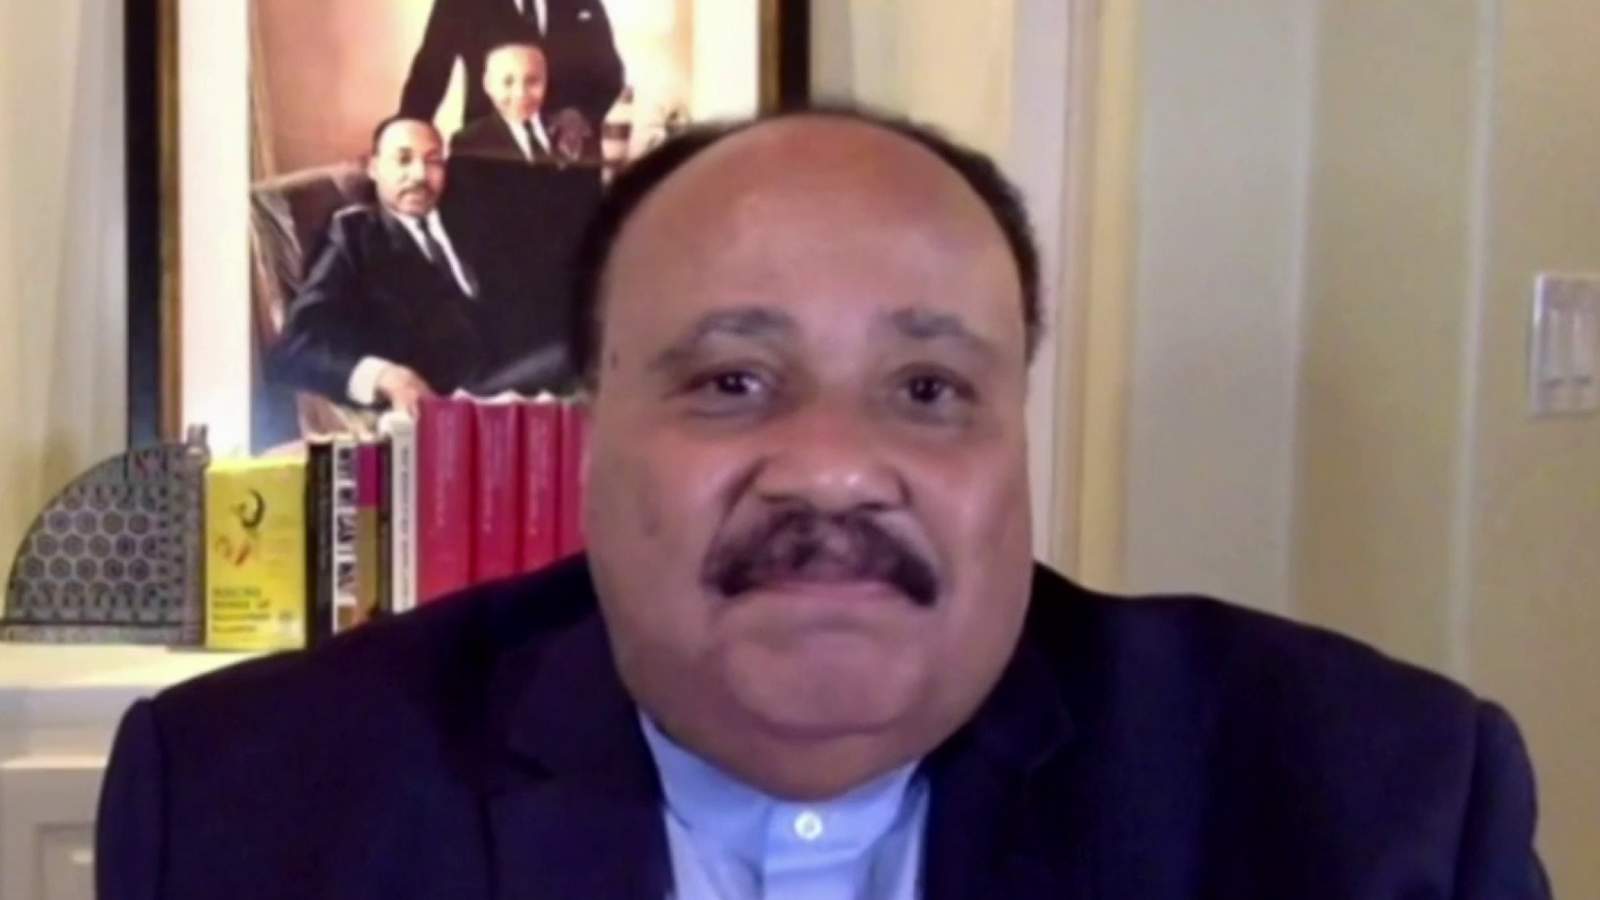 Hear from civil rights activist Martin Luther King III